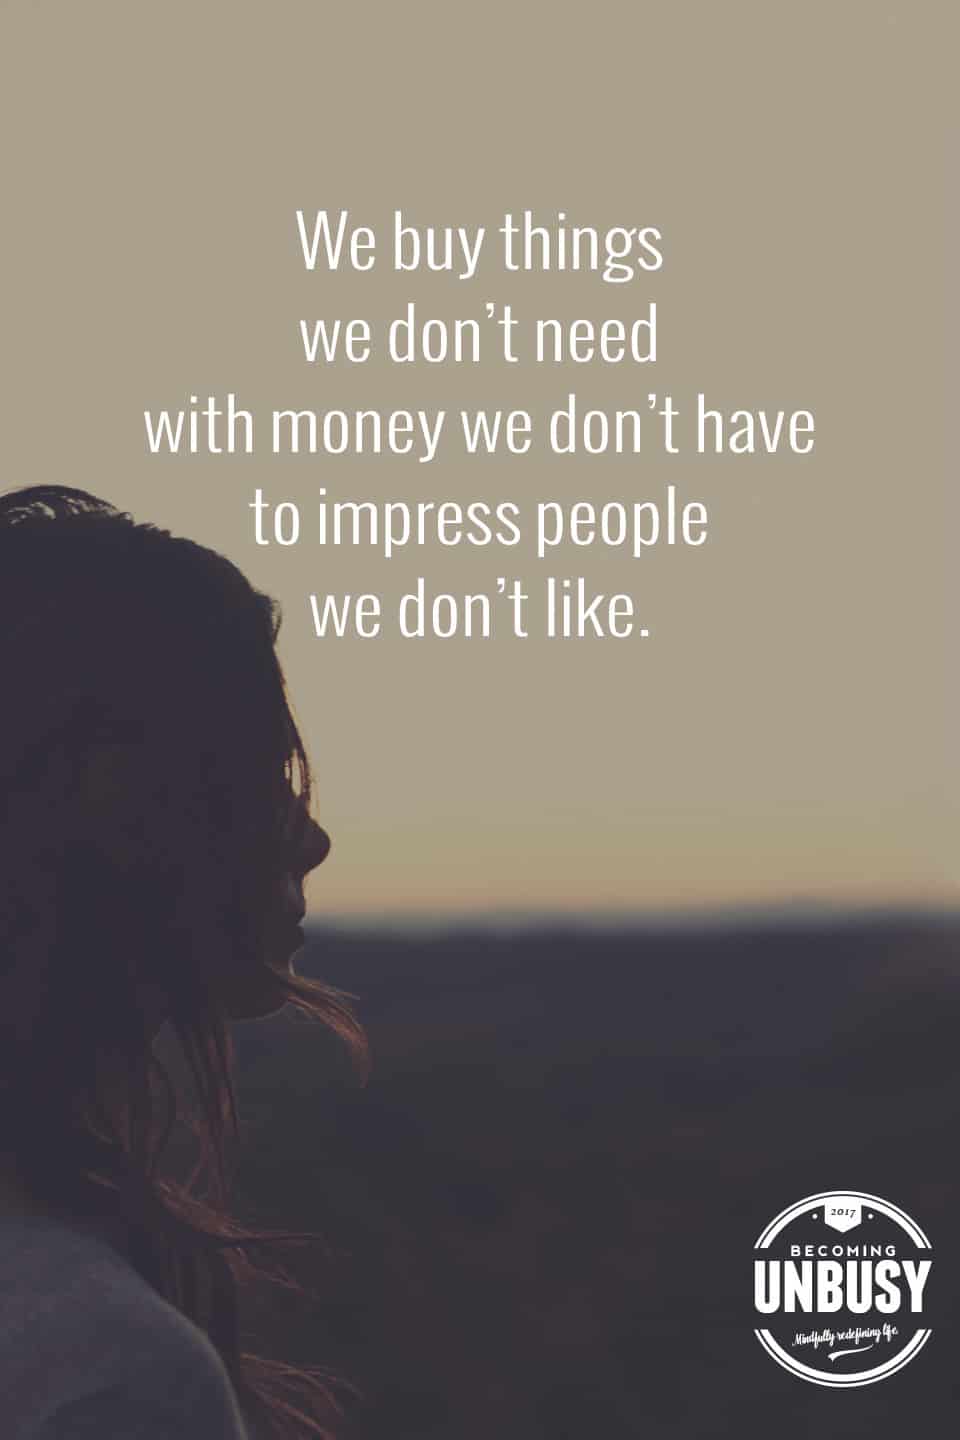 We buy things we don't need with money we don't have to impress people we don't like. #minimalism #truth #quote #debtfree *So true. Loving this post